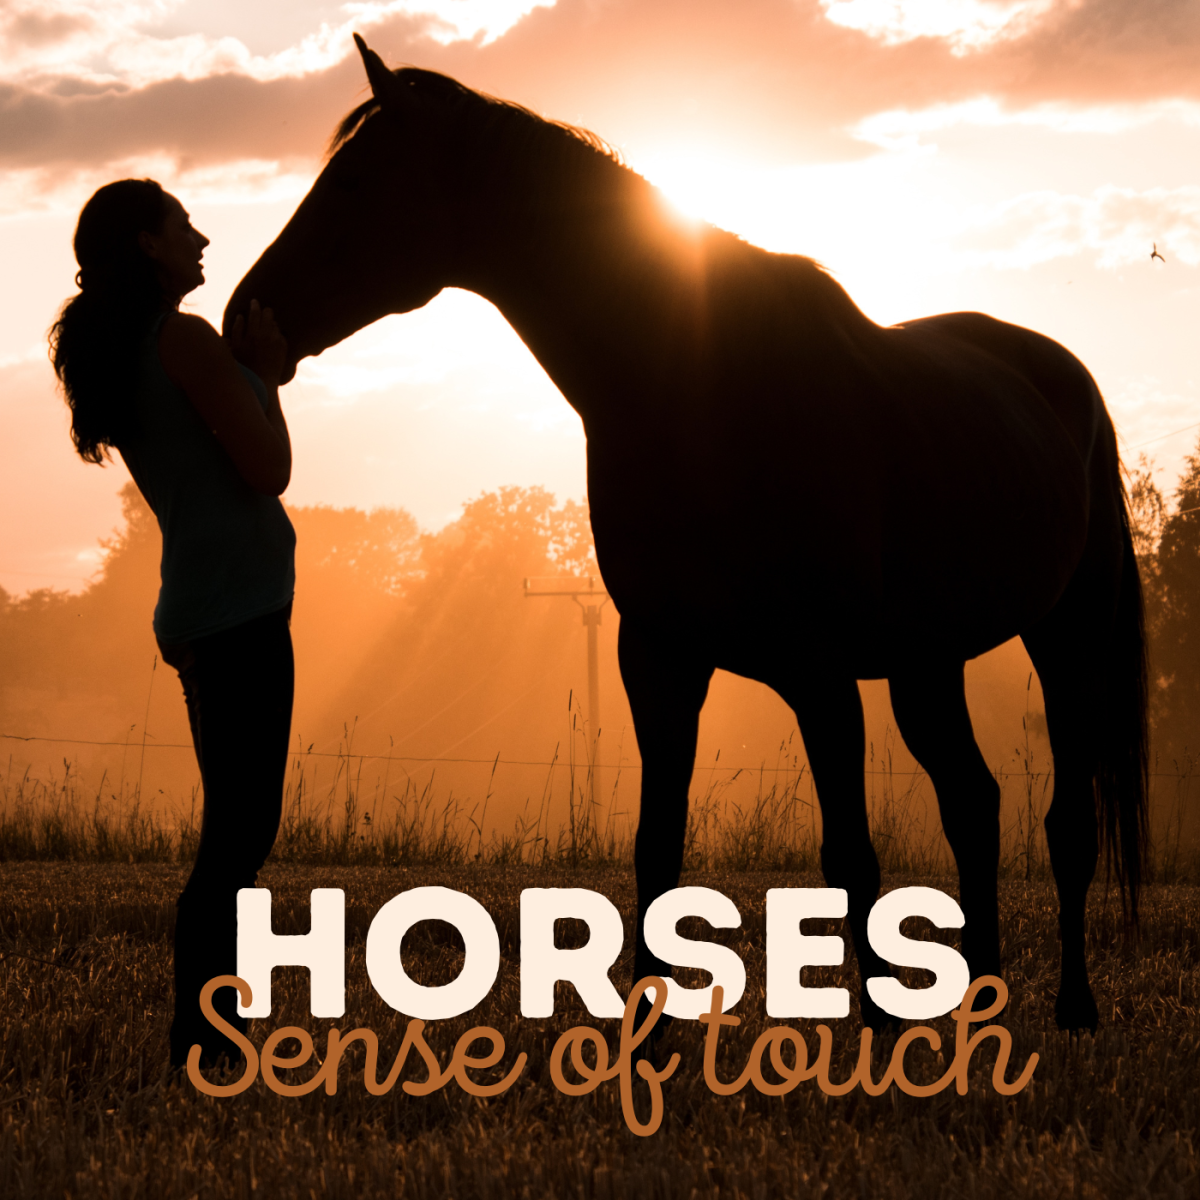 Horses: Their Sense of Feel and Touch